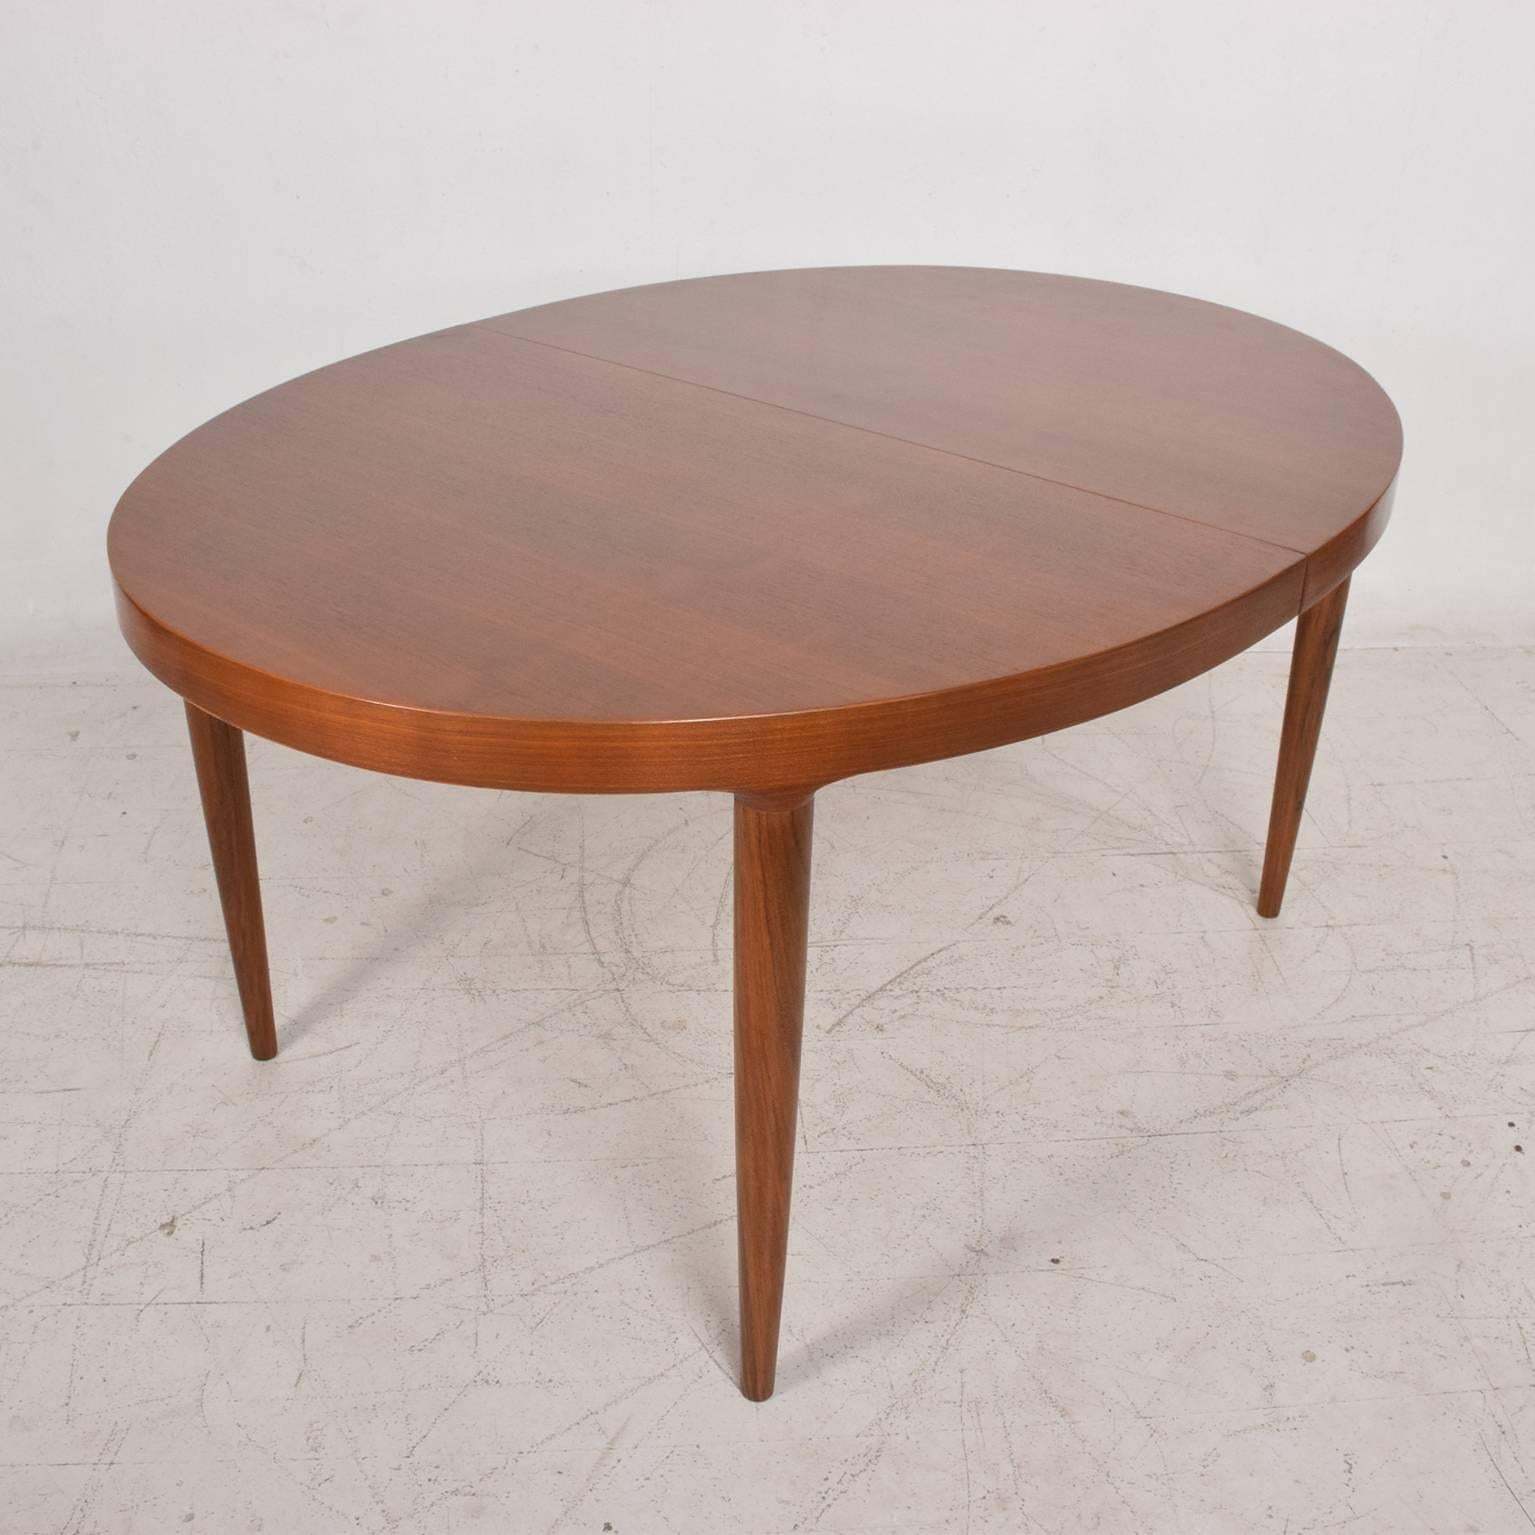 Midcentury Danish Modern Teak Dining Table in Excellent Condition 2